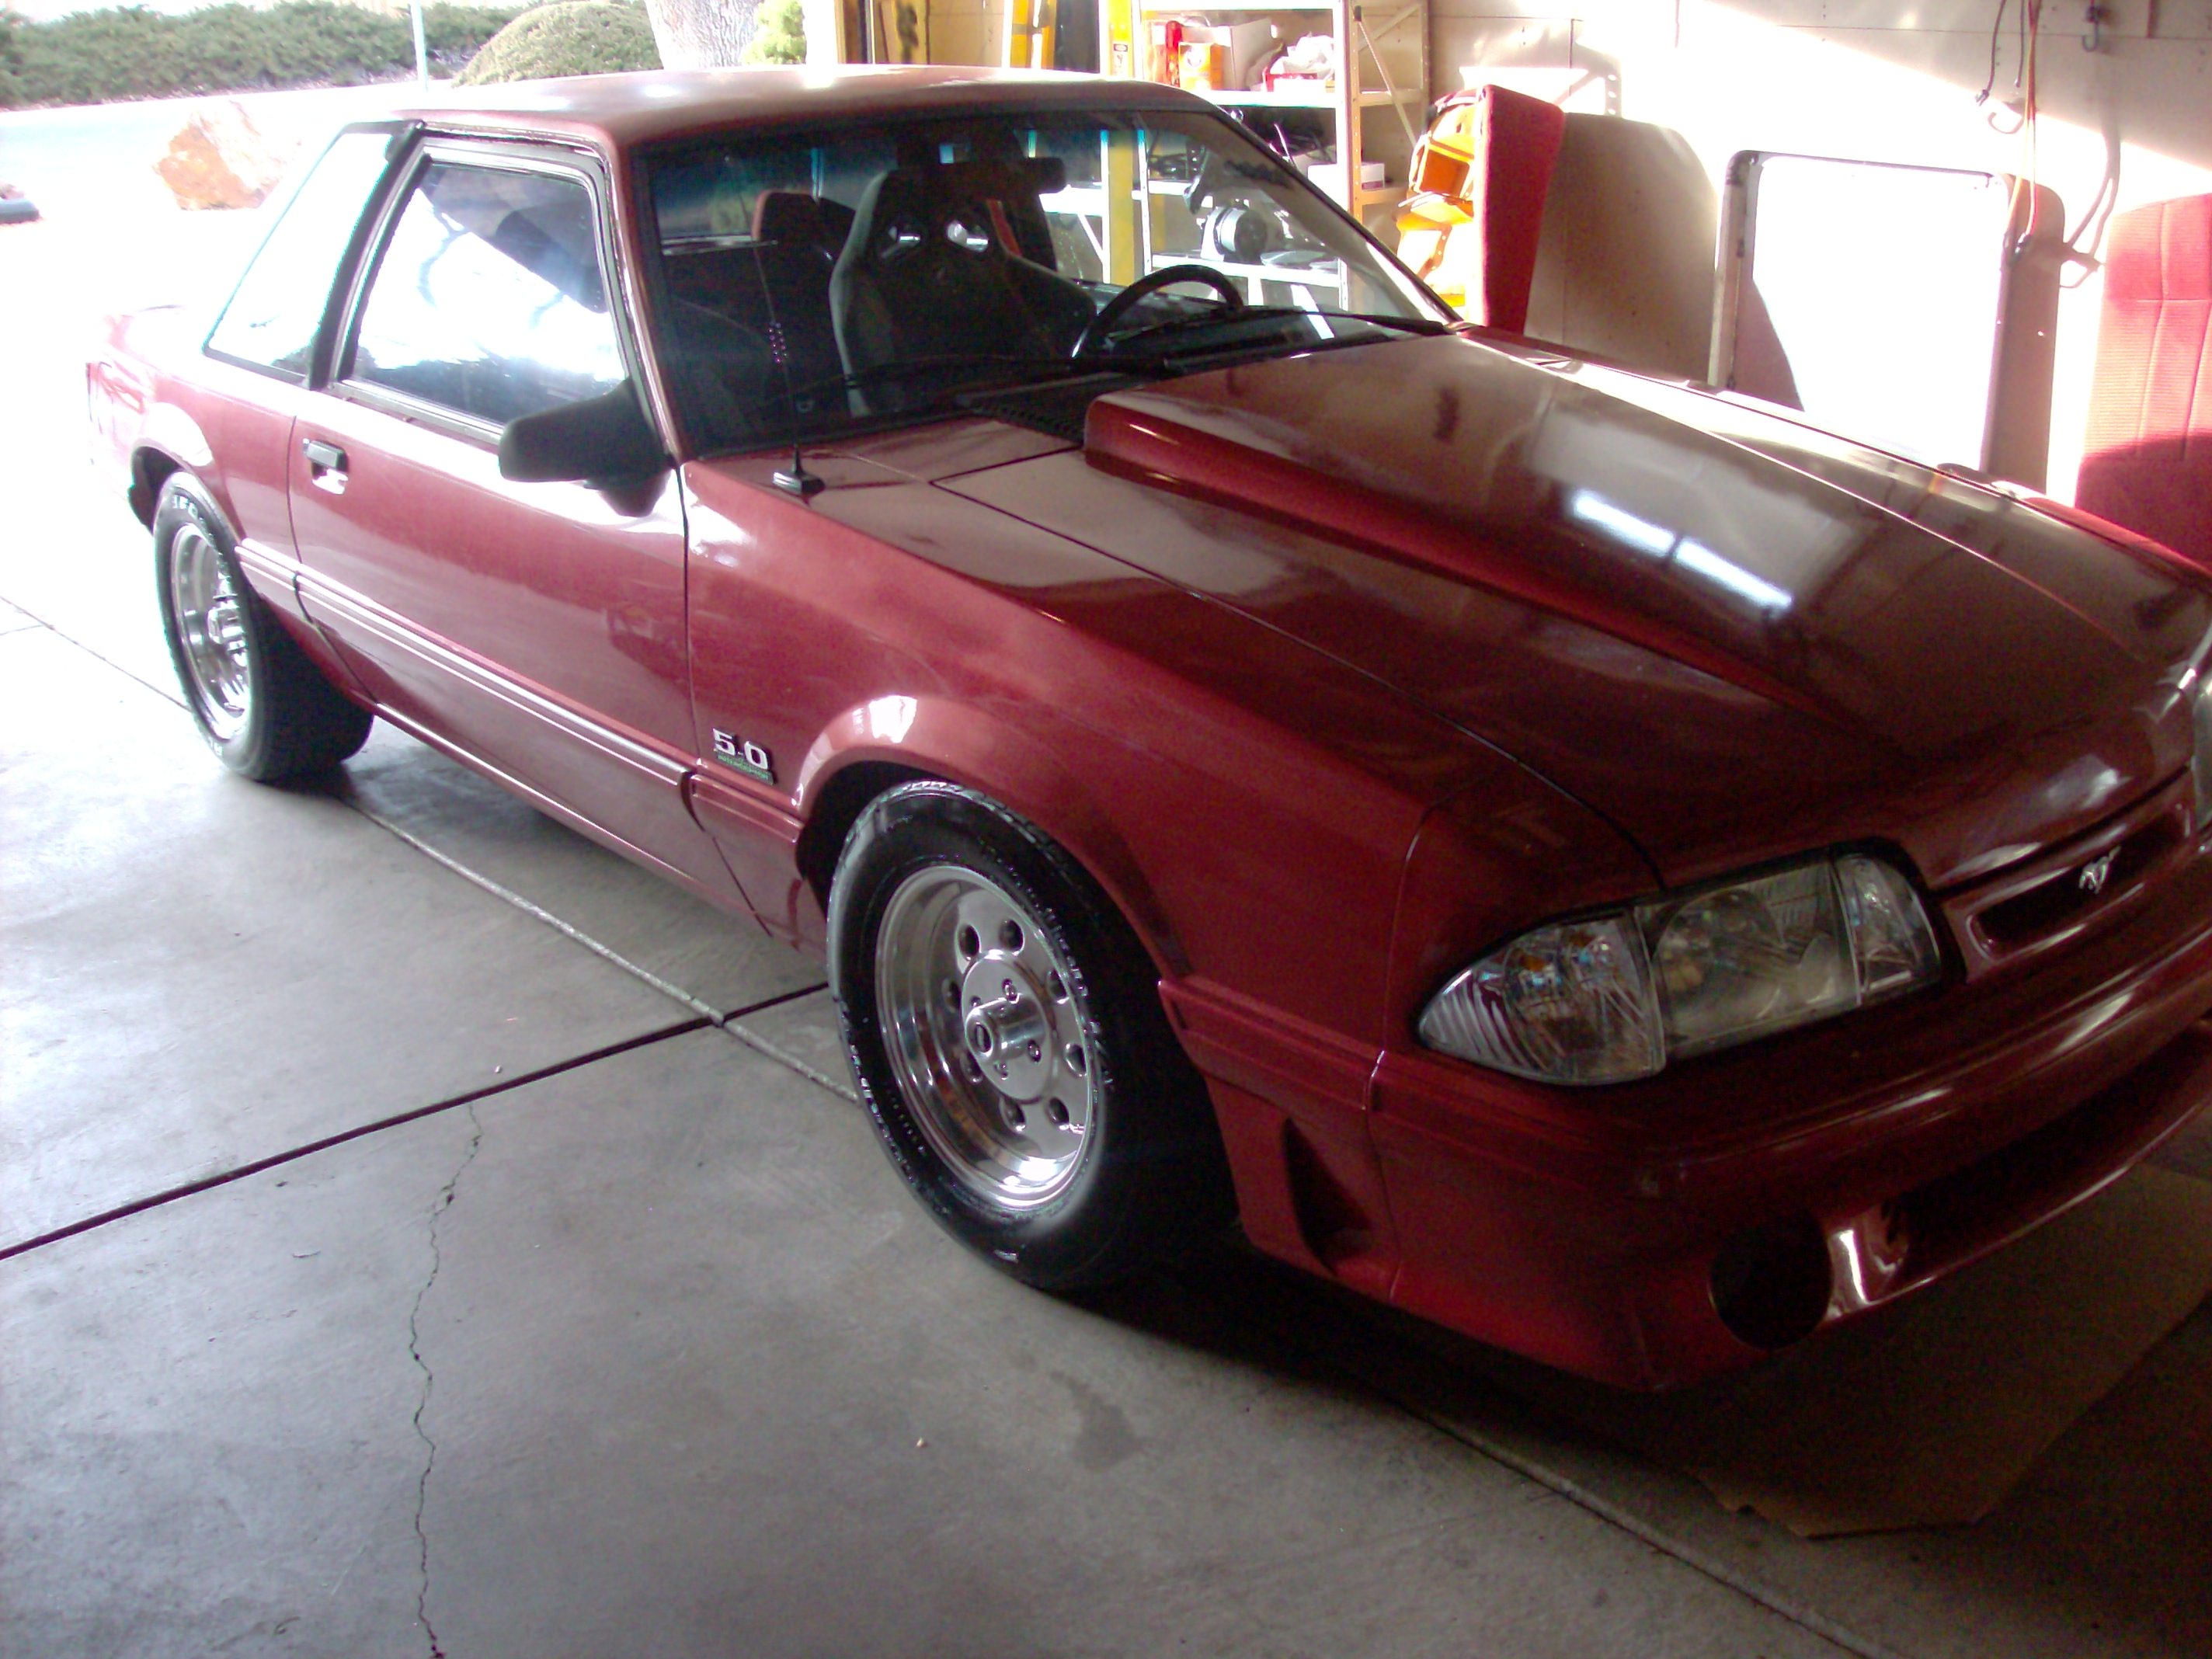  1990 Ford Mustang lx